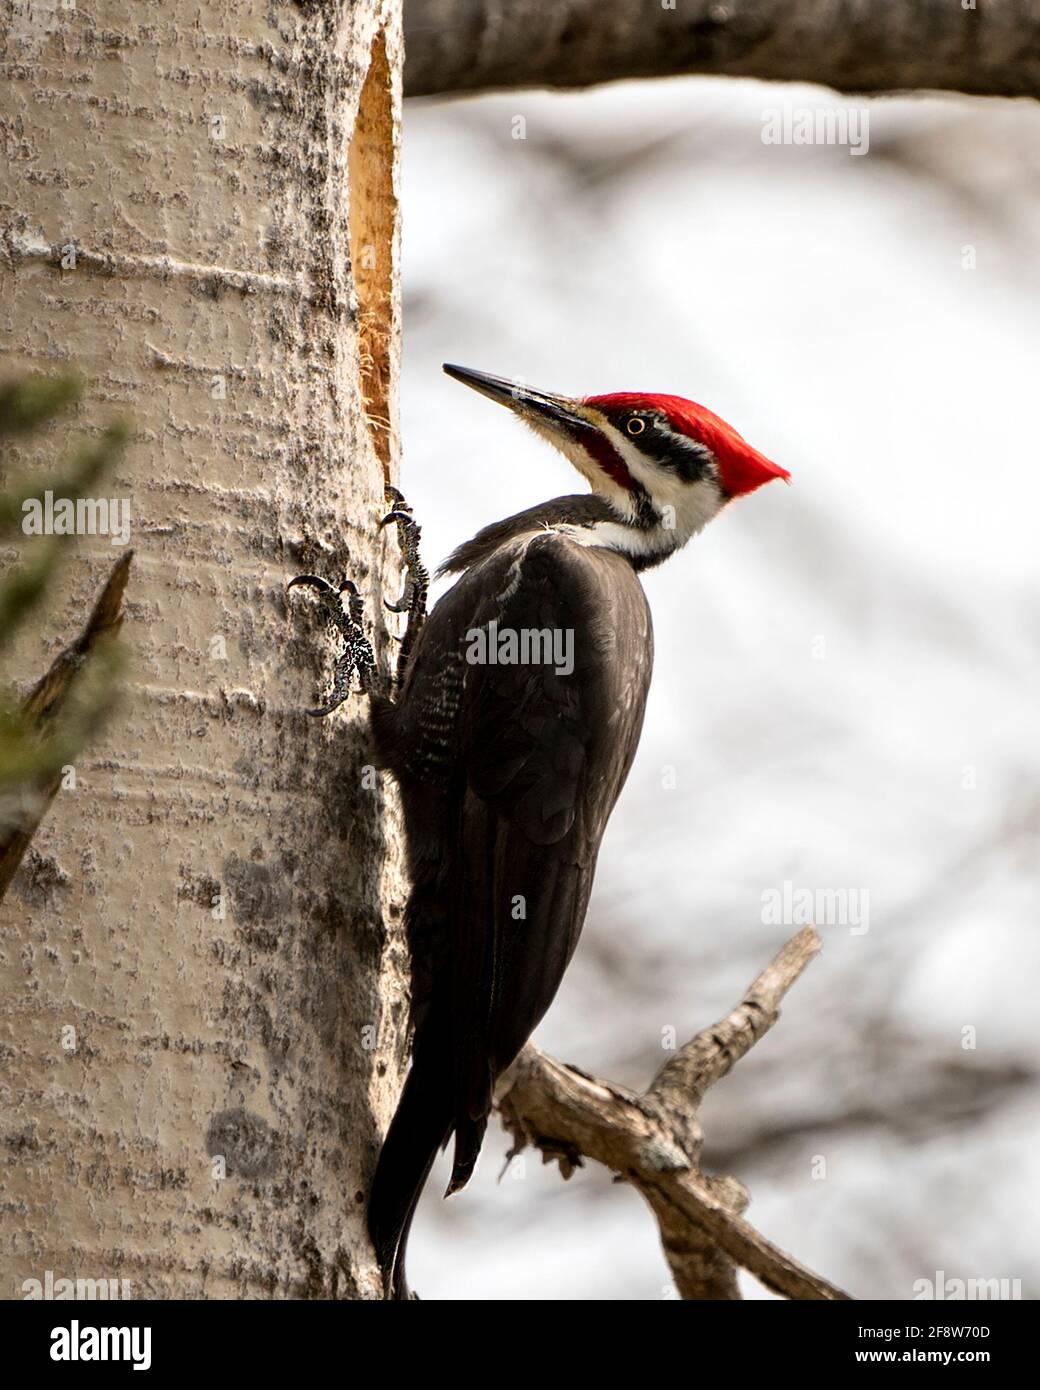 Woodpecker bird close-up profile view perched on a tree trunk with blur background in its environment and habitat drumming a hole in the tree. Stock Photo